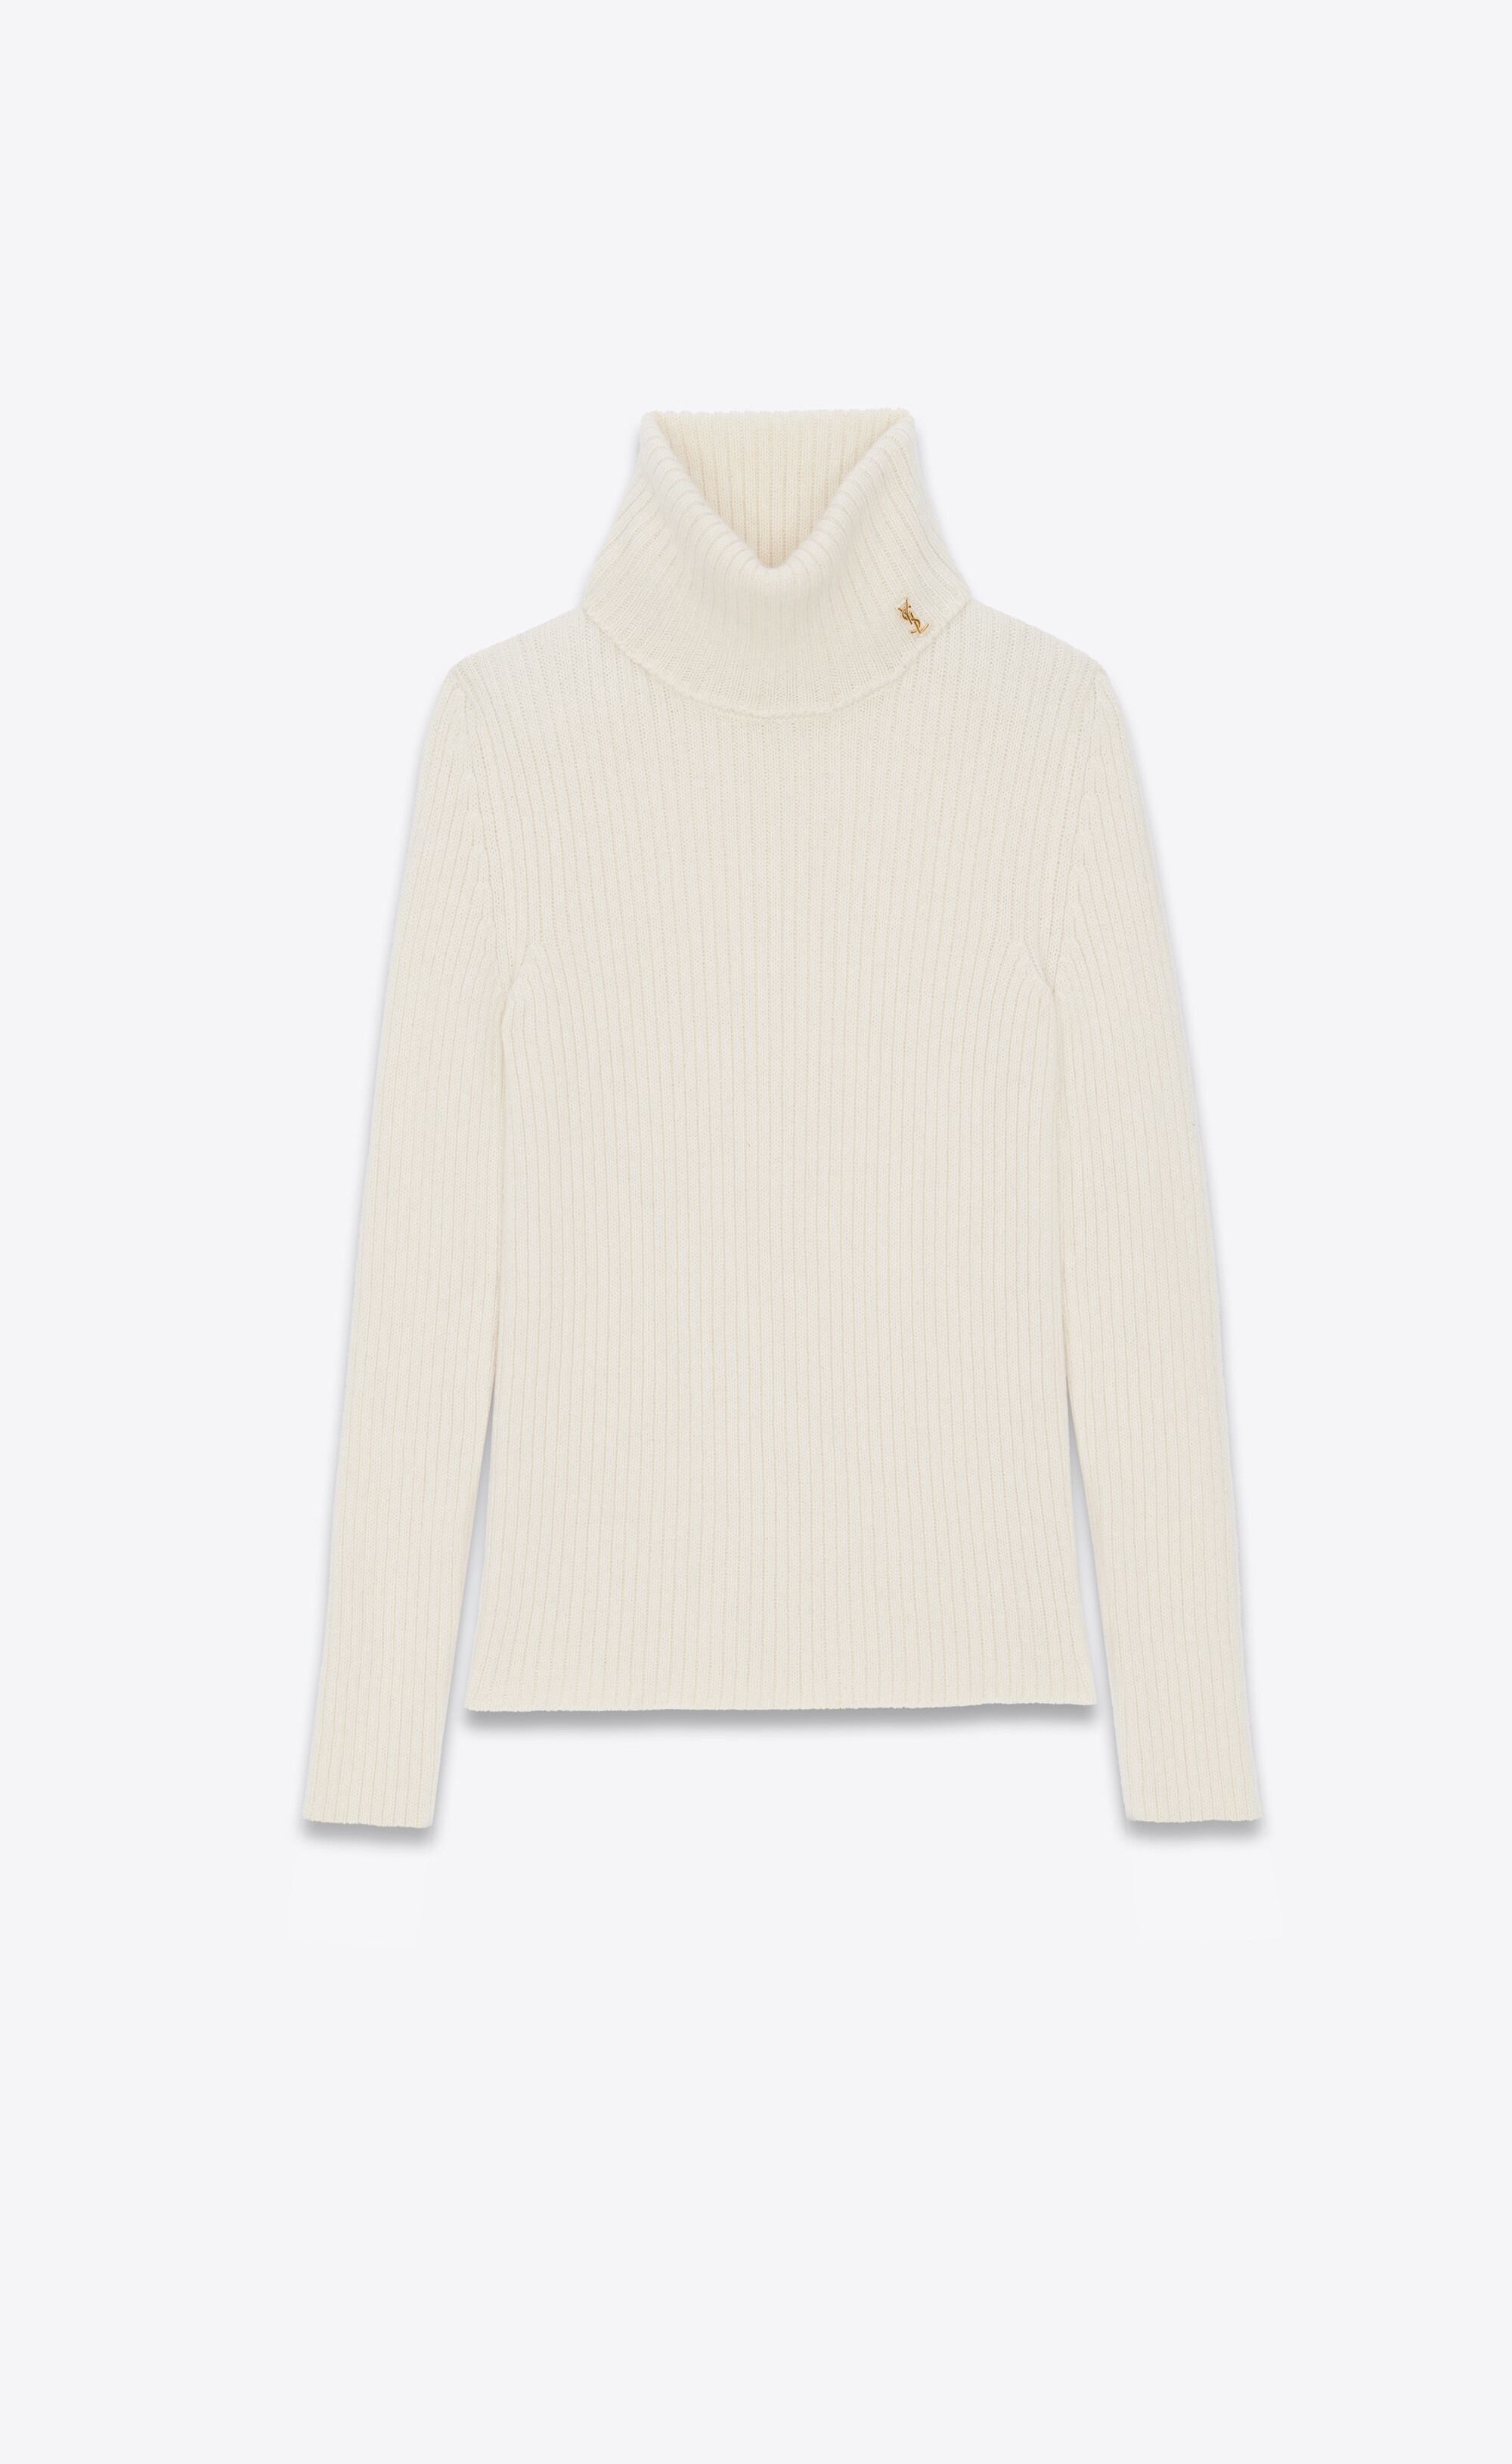 turtleneck sweater in wool, cashmere and mohair - 1